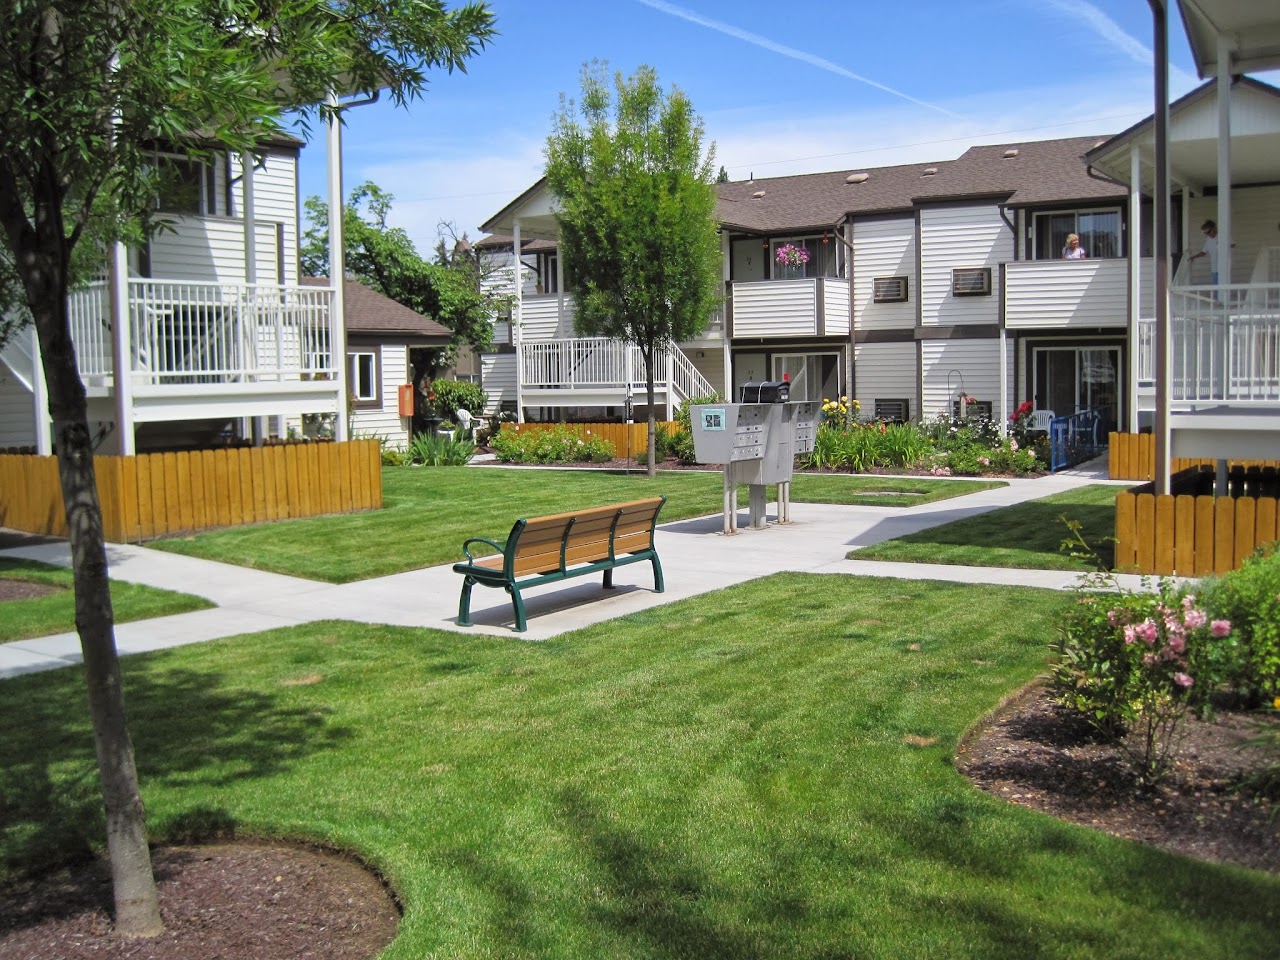 Photo of CONIFER GARDENS. Affordable housing located at 700 ROYAL AVE MEDFORD, OR 97504